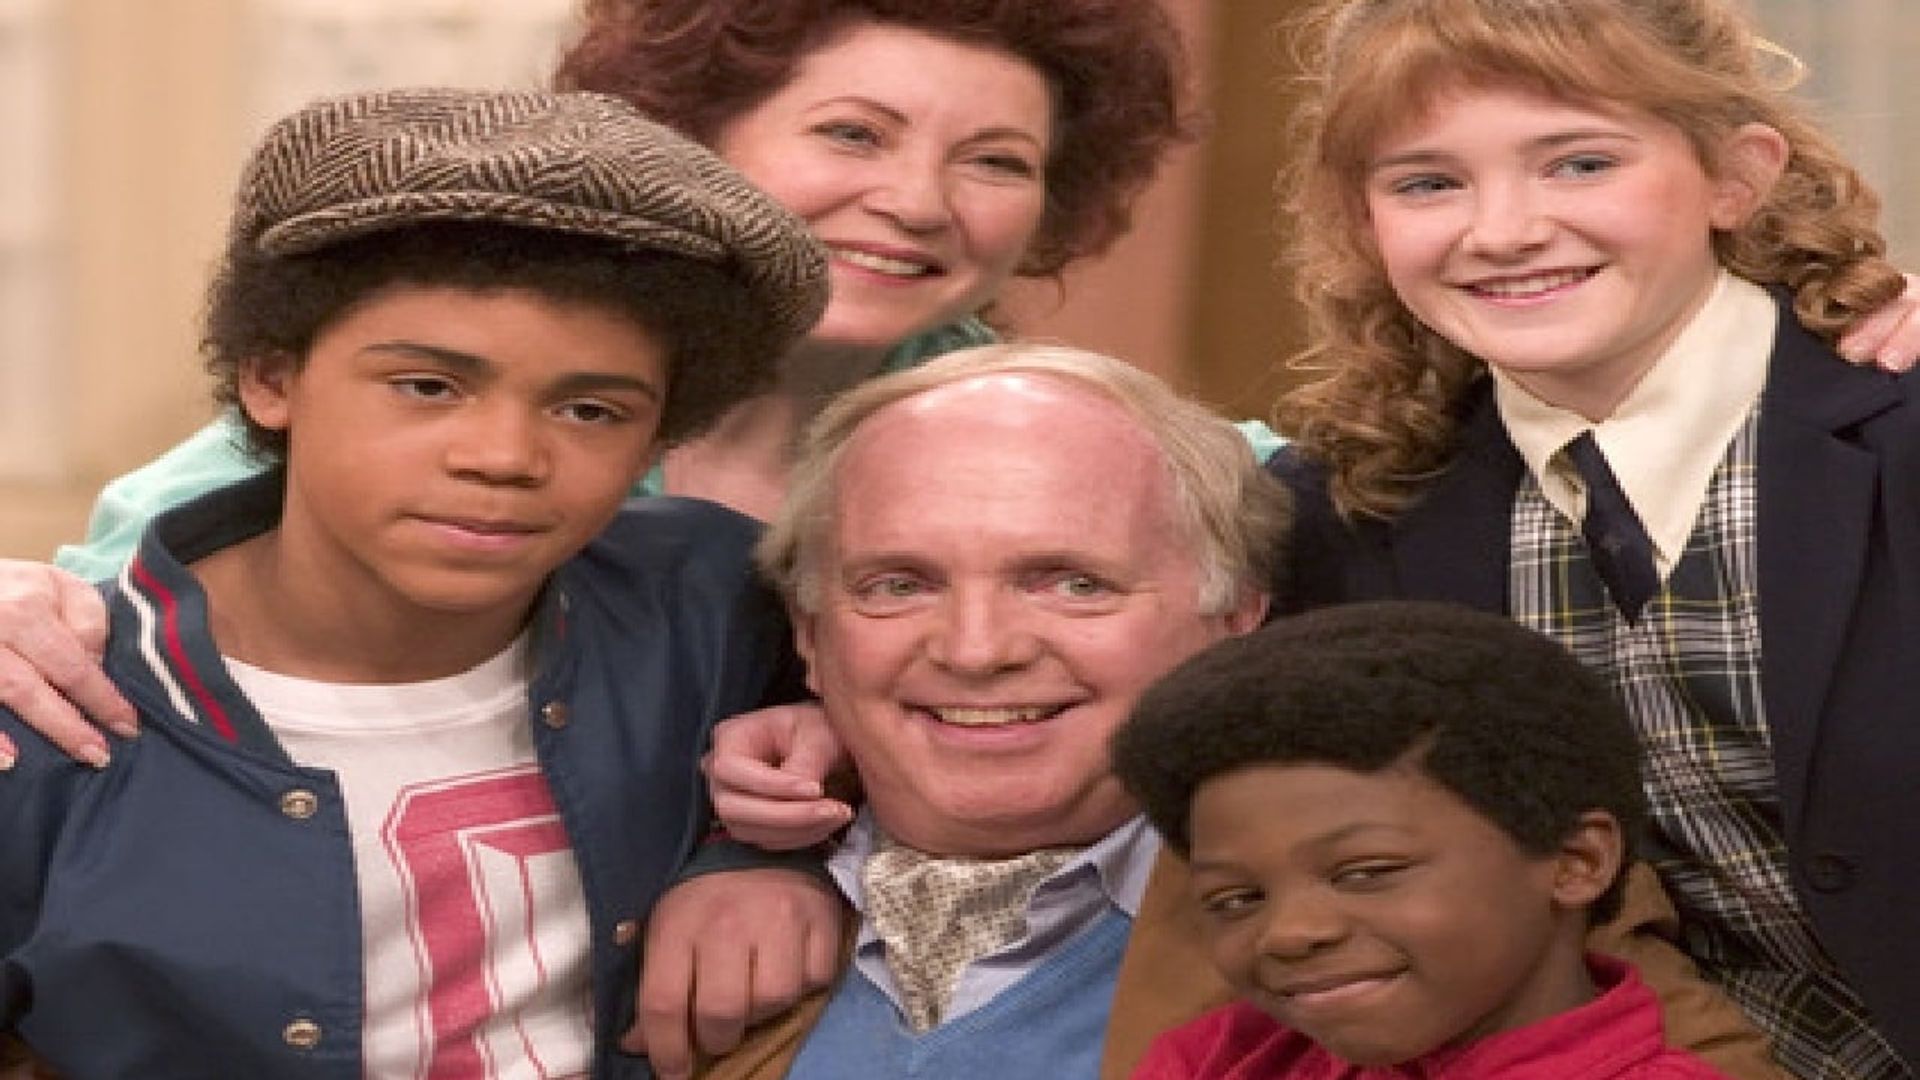 Behind the Camera: The Unauthorized Story of 'Diff'rent Strokes' background